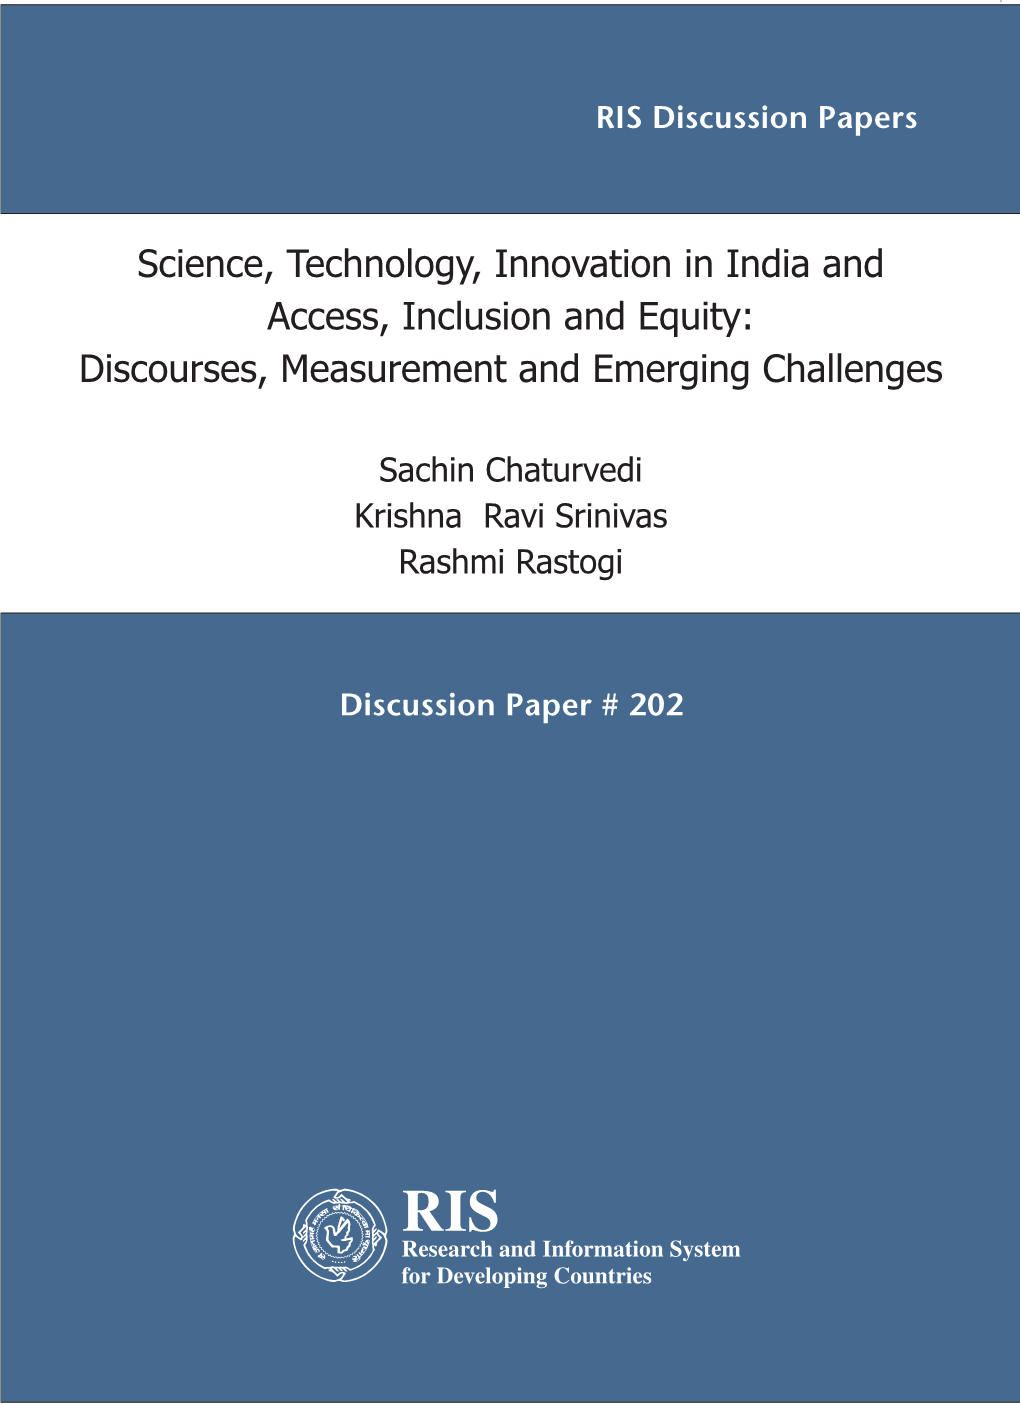 Science, Technology, Innovation in India and Access, Inclusion and Equity: Discourses, Measurement and Emerging Challenges